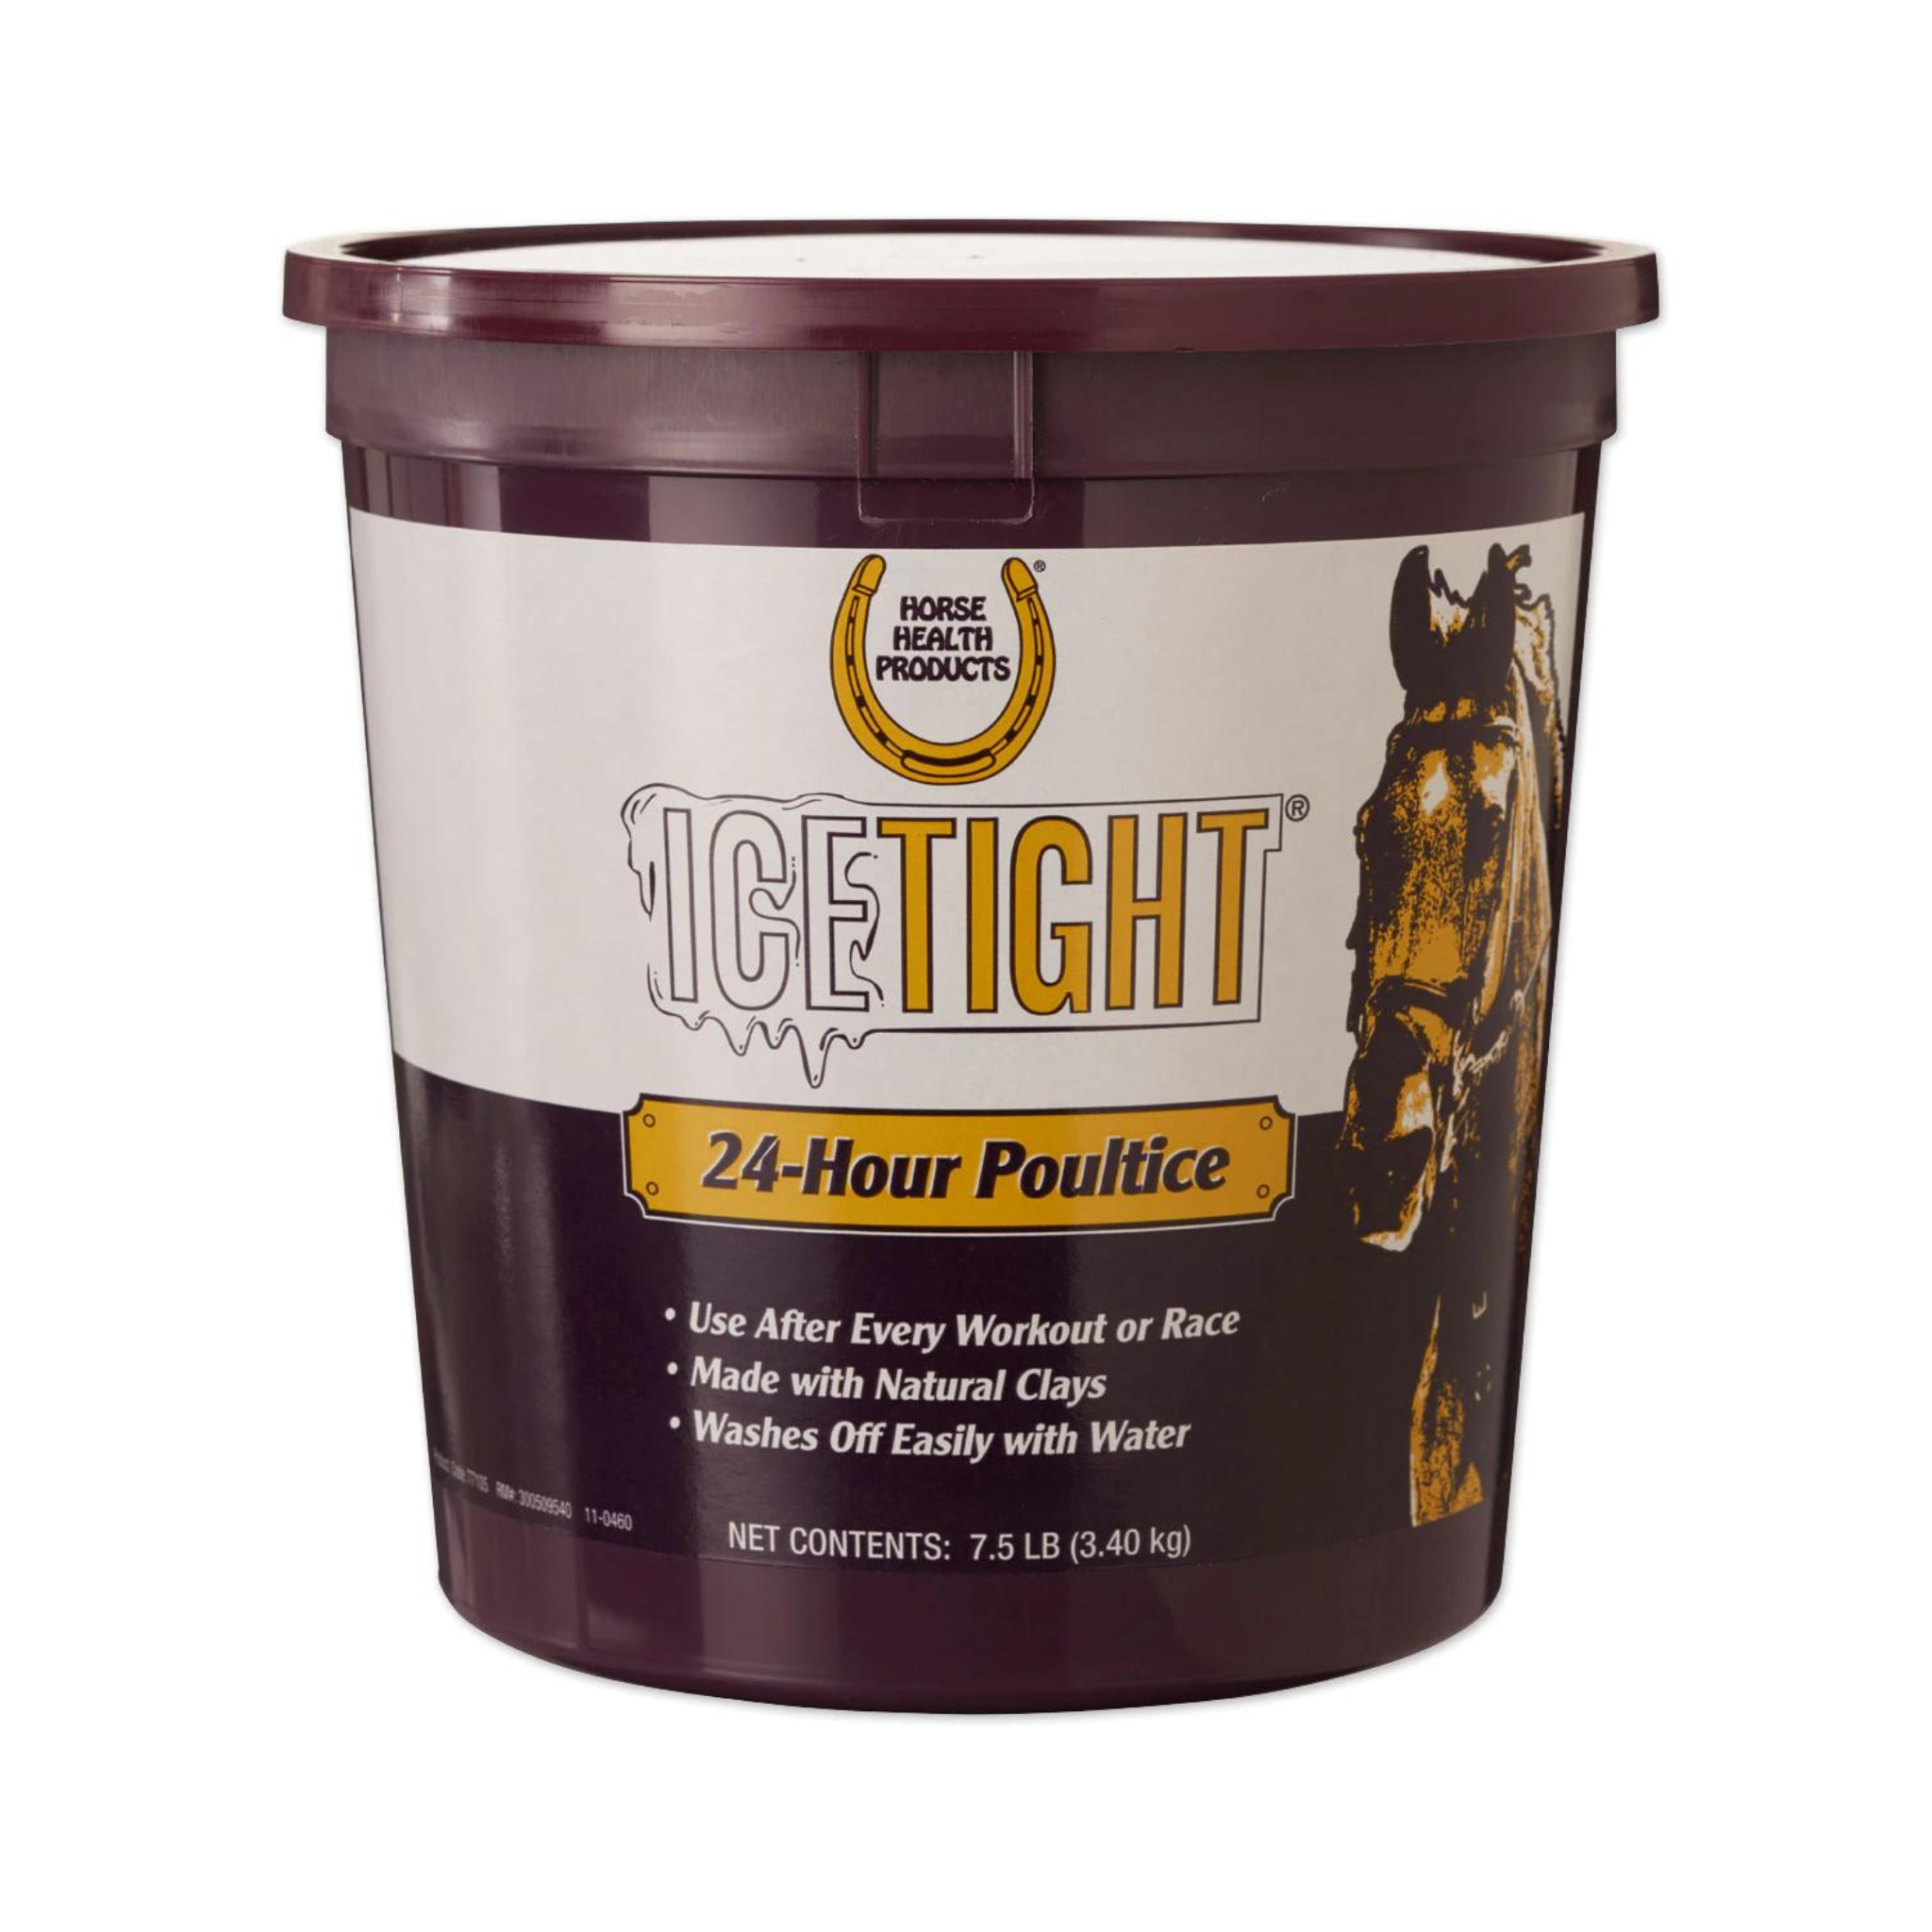 IceTight Poultice Horse Supplement